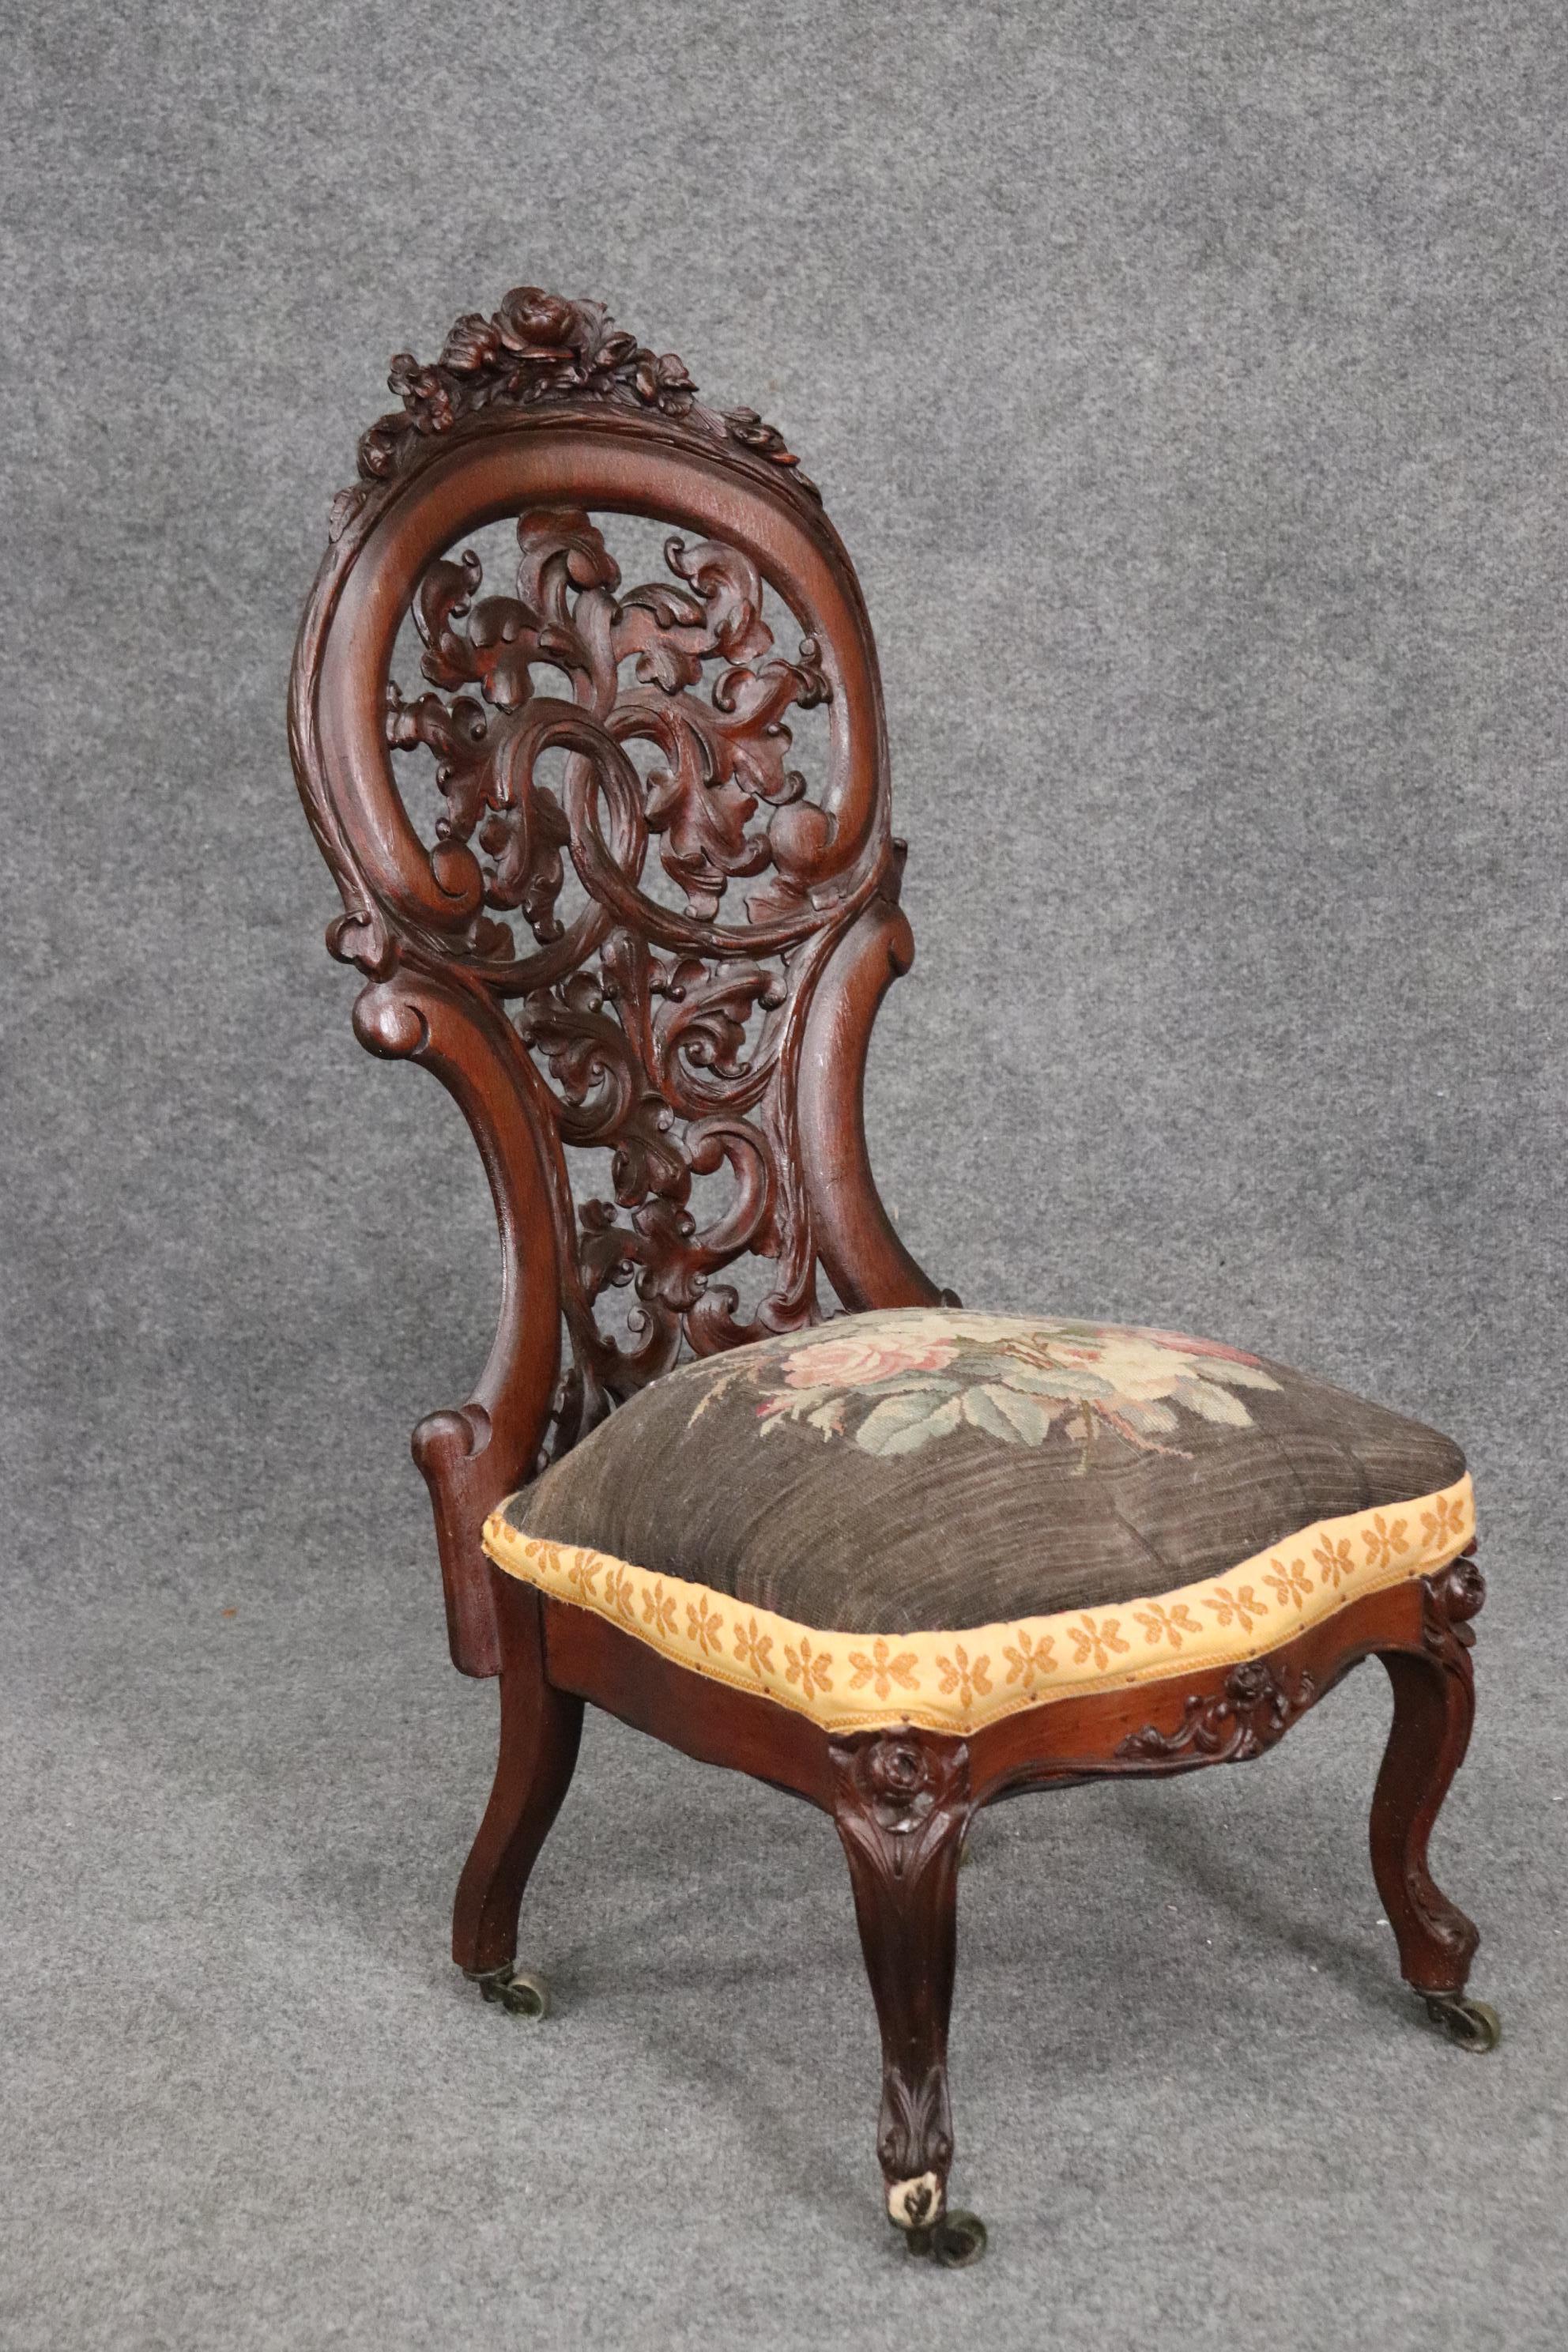 This is a gorgeous Meeks or Belter rosewood side chair. The chair is in good original condition and has no major issues. This chair measures 40 tall x 19 wide x 21 deep and the seat height is 16 inches.